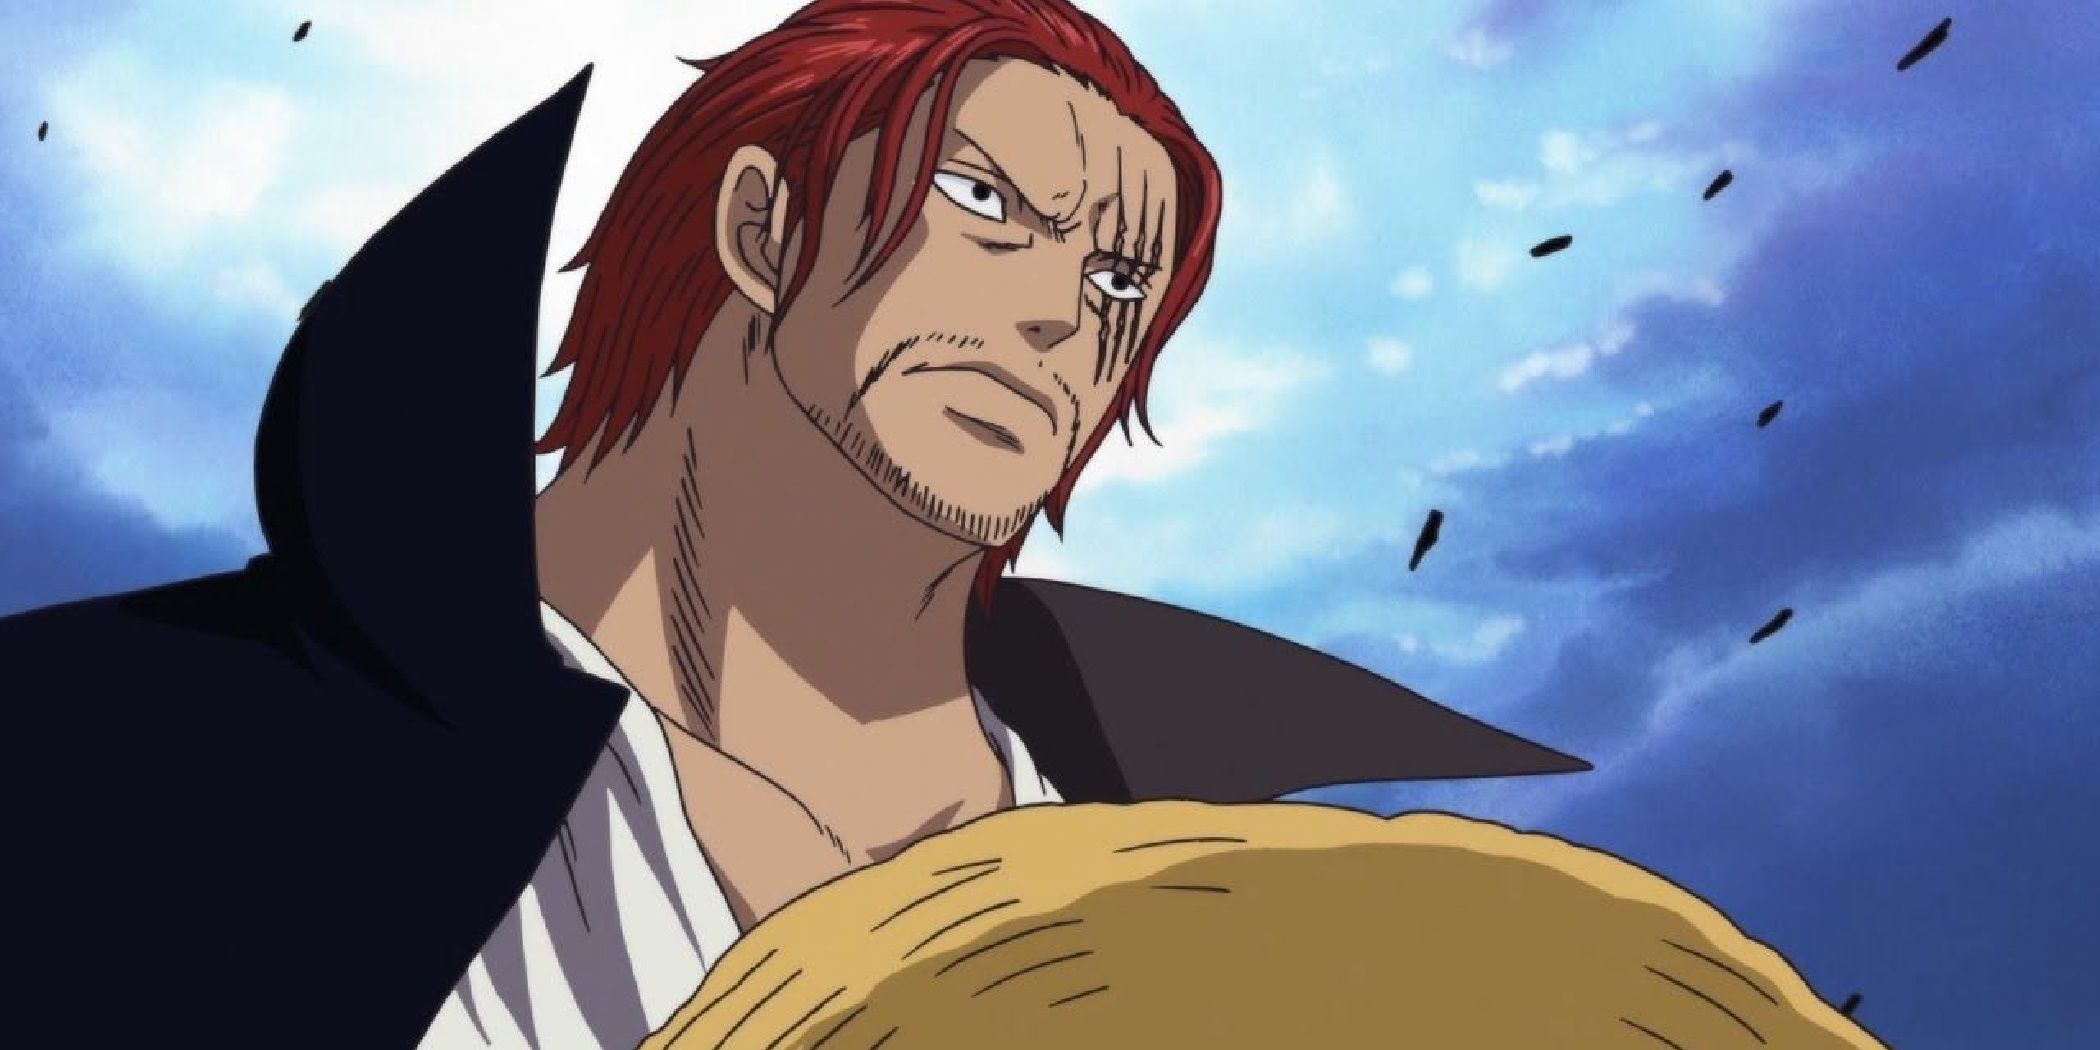 Shanks from One Piece looking serious with a hat in his hand.